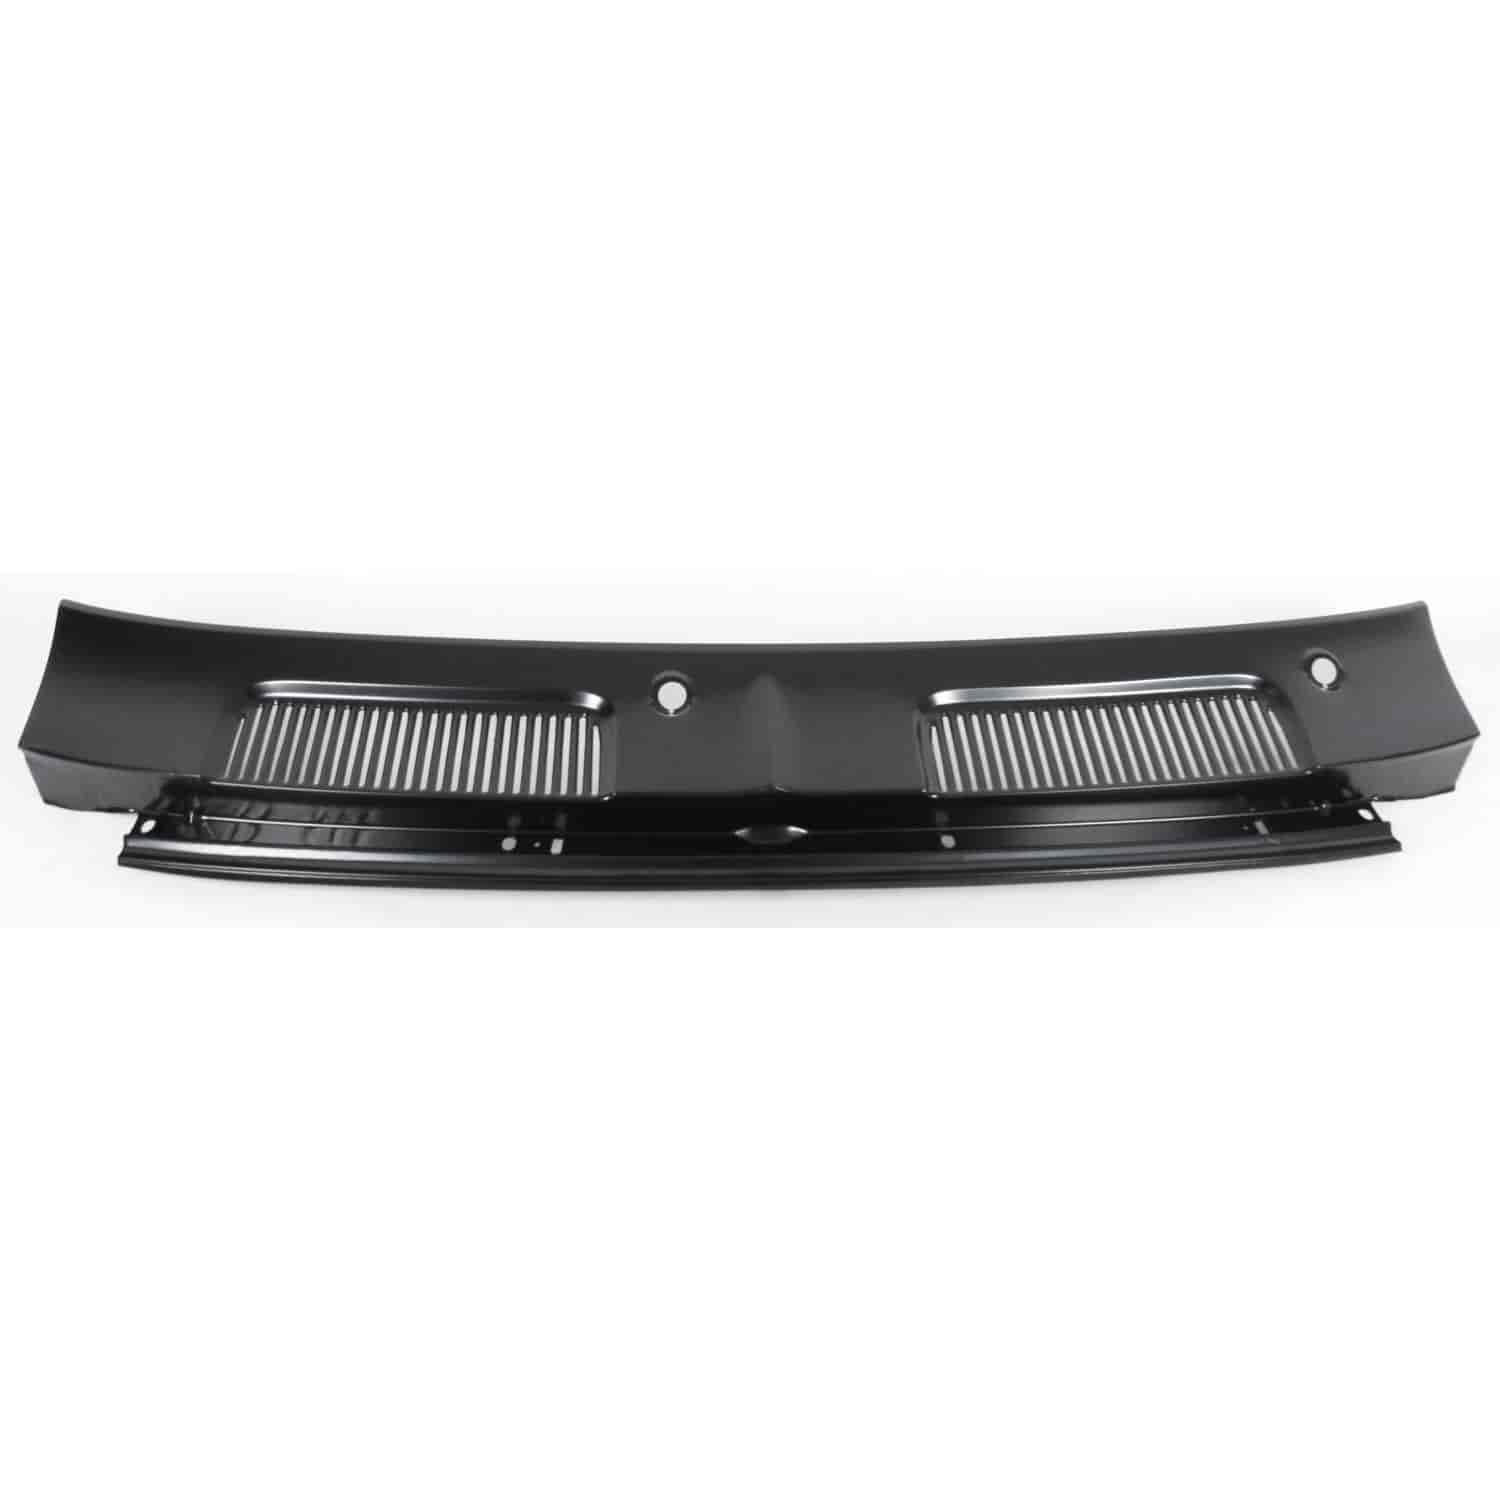 CP01-671 Hood Cowl Vent Grille for 1967-1969 Chevy Camaro